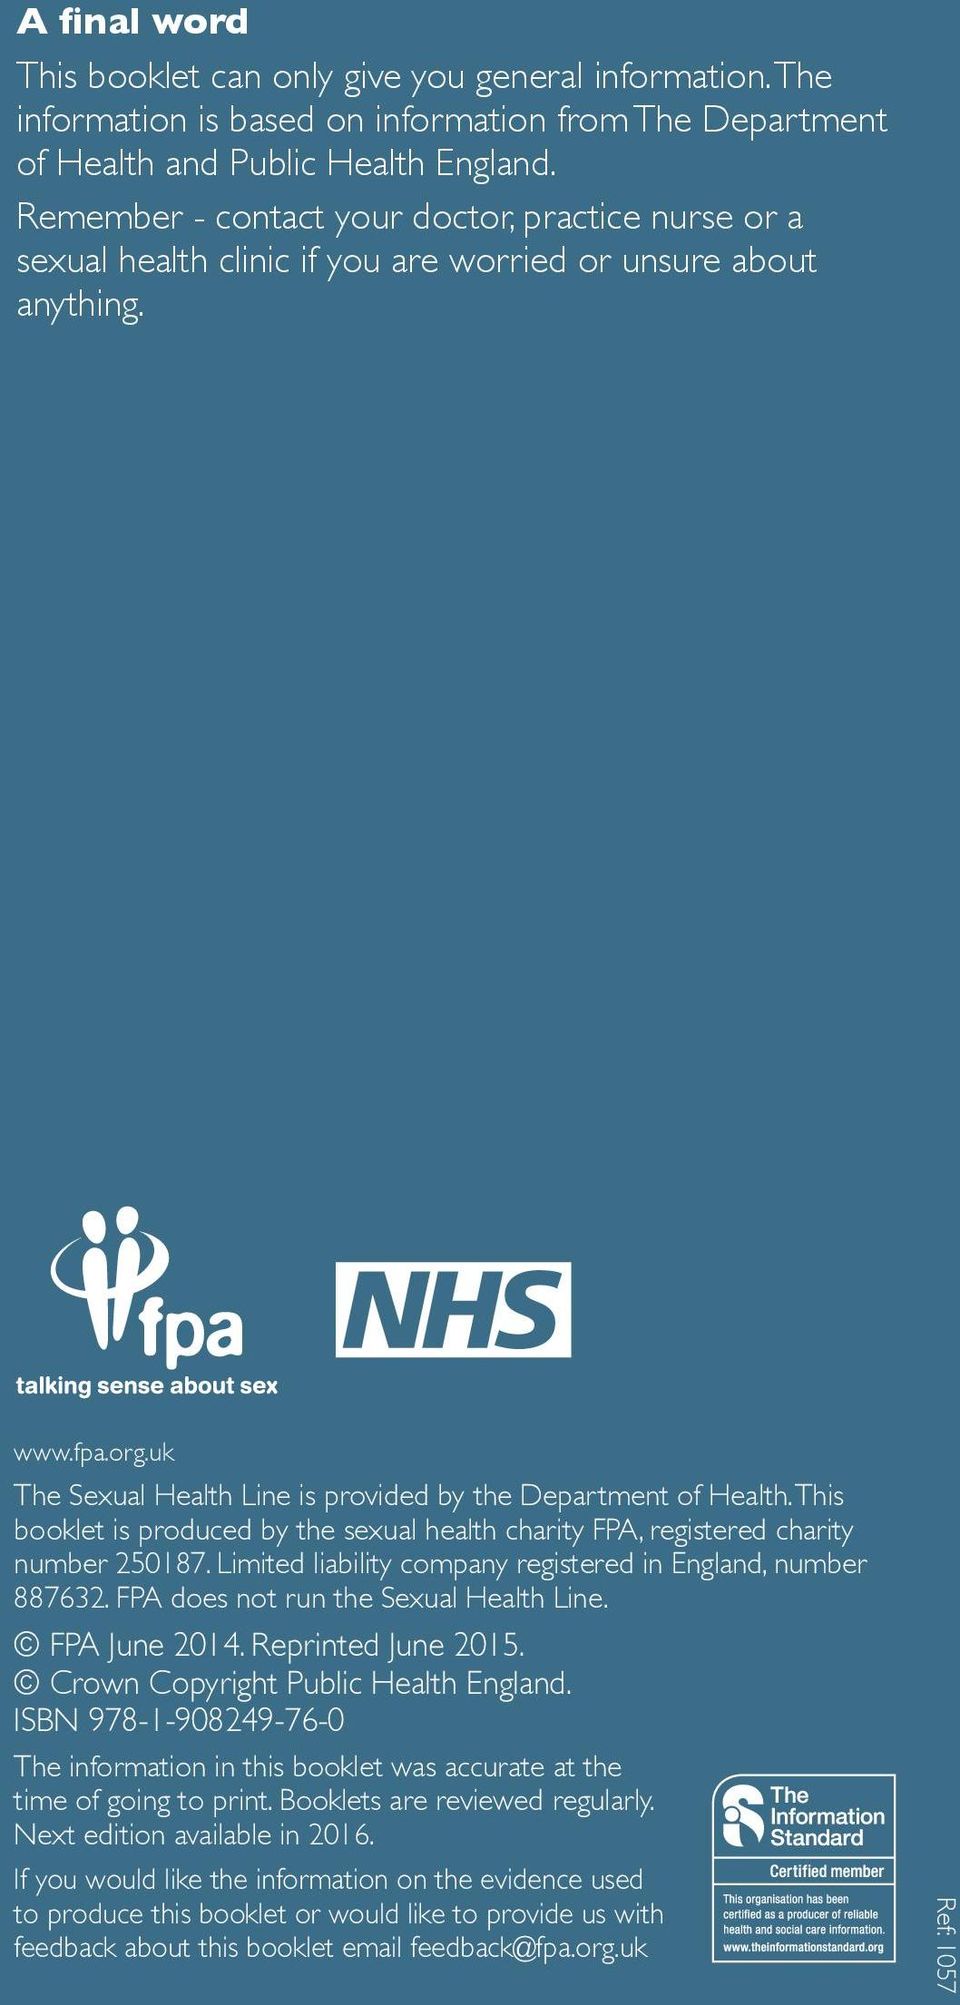 This booklet is produced by the sexual health charity FPA, registered charity number 250187. Limited liability company registered in England, number 887632. FPA does not run the Sexual Health Line.